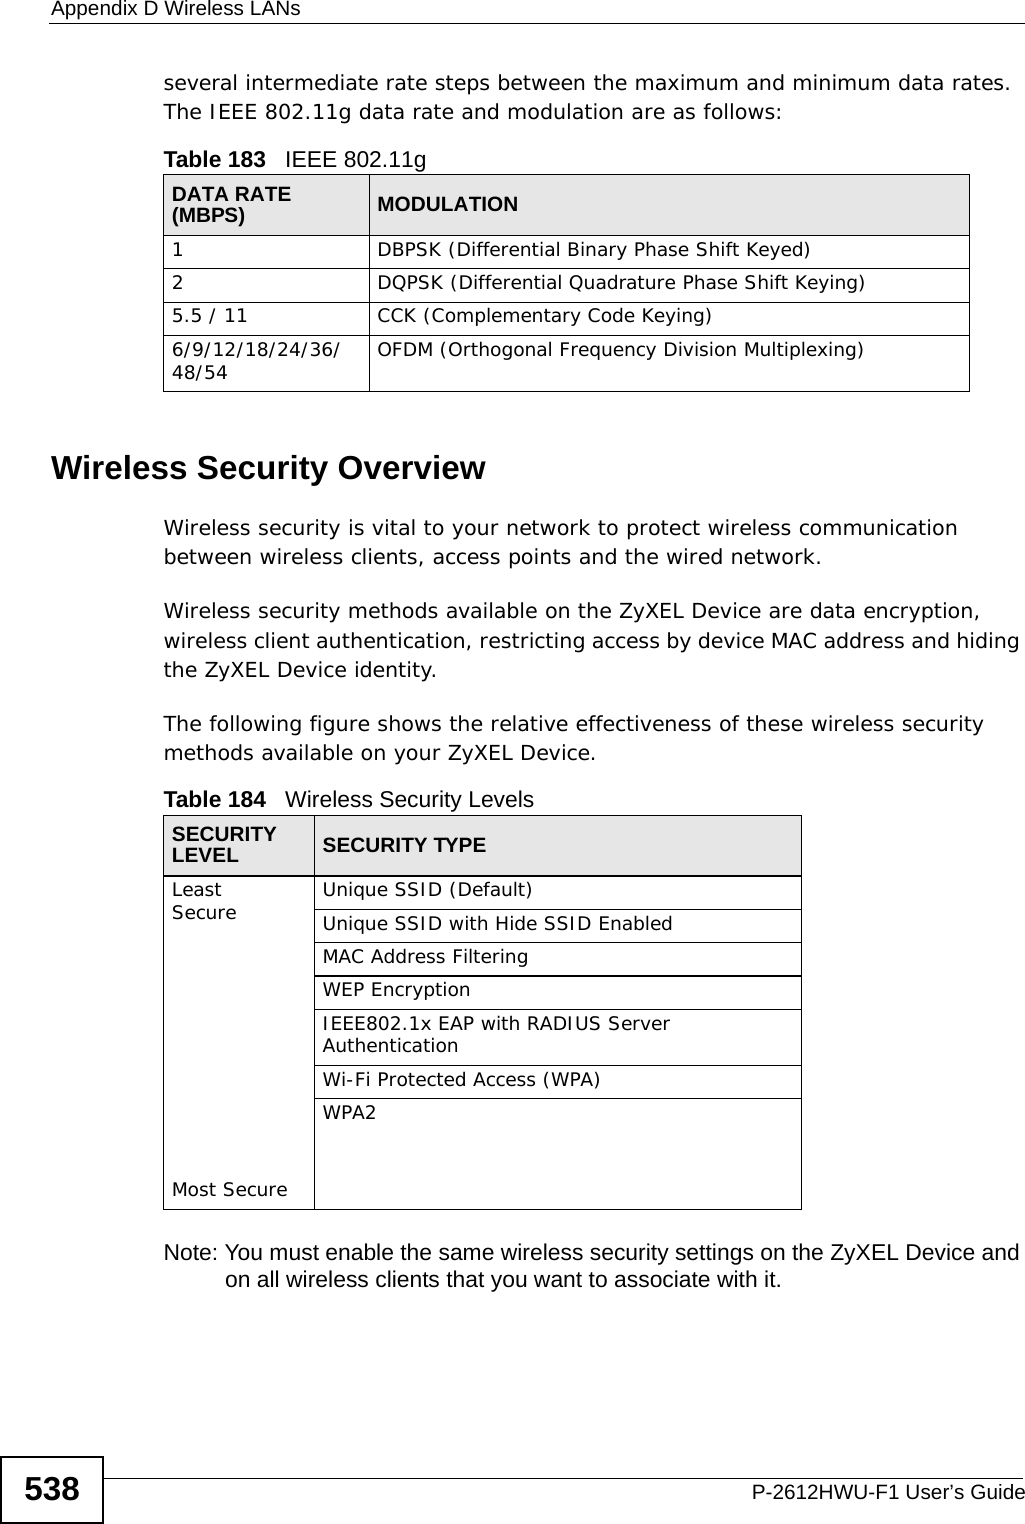 Appendix D Wireless LANsP-2612HWU-F1 User’s Guide538several intermediate rate steps between the maximum and minimum data rates. The IEEE 802.11g data rate and modulation are as follows:Wireless Security OverviewWireless security is vital to your network to protect wireless communication between wireless clients, access points and the wired network.Wireless security methods available on the ZyXEL Device are data encryption, wireless client authentication, restricting access by device MAC address and hiding the ZyXEL Device identity.The following figure shows the relative effectiveness of these wireless security methods available on your ZyXEL Device.Note: You must enable the same wireless security settings on the ZyXEL Device and on all wireless clients that you want to associate with it. Table 183   IEEE 802.11gDATA RATE (MBPS) MODULATION1 DBPSK (Differential Binary Phase Shift Keyed)2 DQPSK (Differential Quadrature Phase Shift Keying)5.5 / 11 CCK (Complementary Code Keying) 6/9/12/18/24/36/48/54 OFDM (Orthogonal Frequency Division Multiplexing) Table 184   Wireless Security LevelsSECURITY LEVEL SECURITY TYPELeast       Secure                                                                                  Most SecureUnique SSID (Default)Unique SSID with Hide SSID EnabledMAC Address FilteringWEP EncryptionIEEE802.1x EAP with RADIUS Server AuthenticationWi-Fi Protected Access (WPA)WPA2